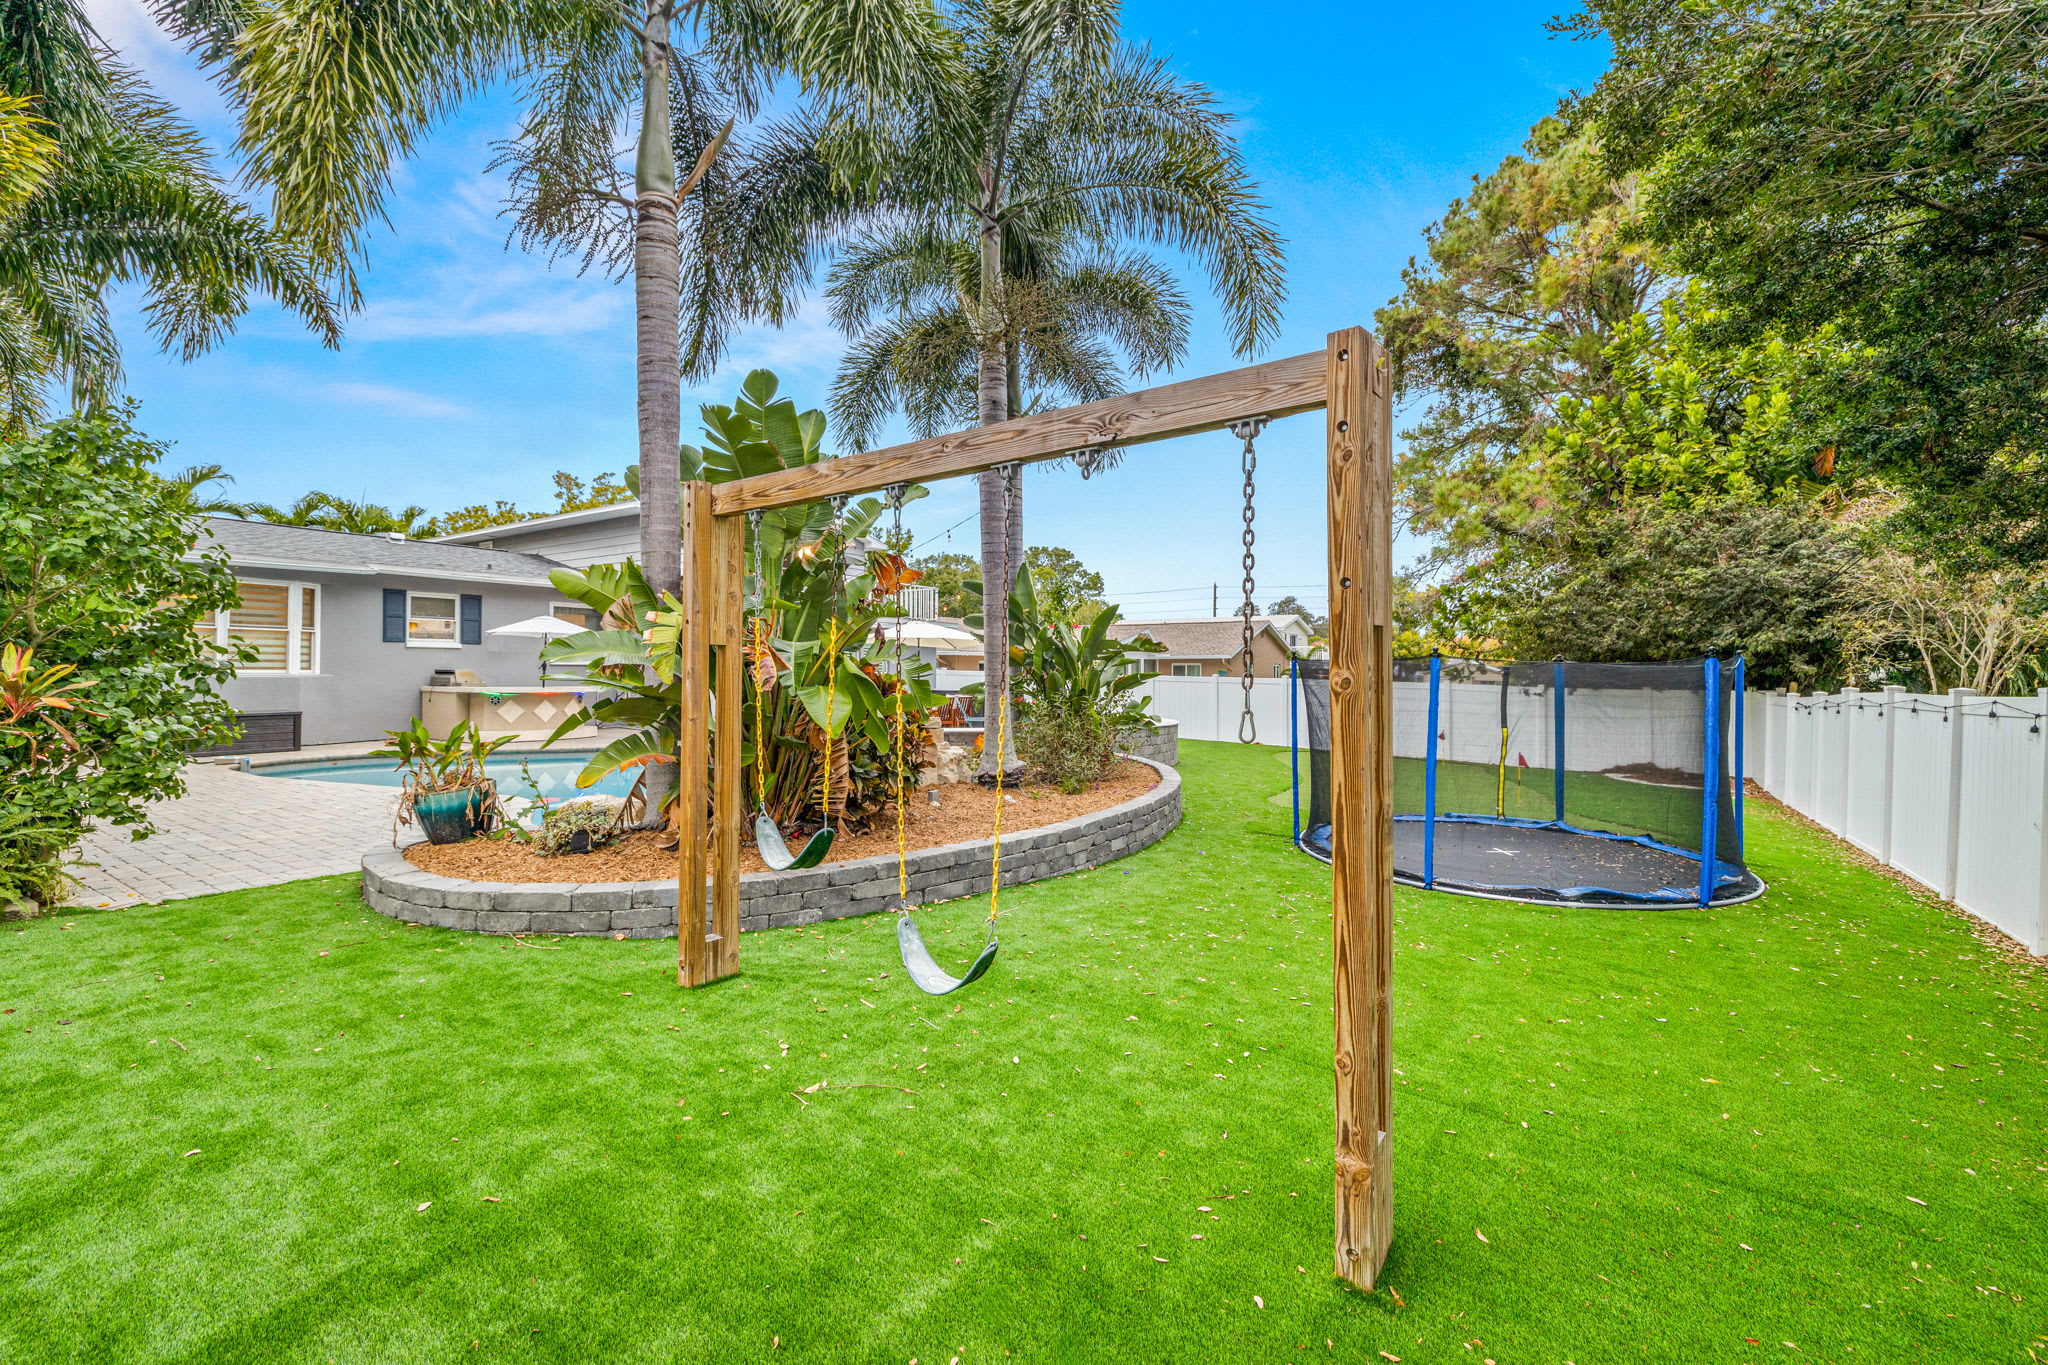 Dream backyard with swing set and in-ground trampoline!